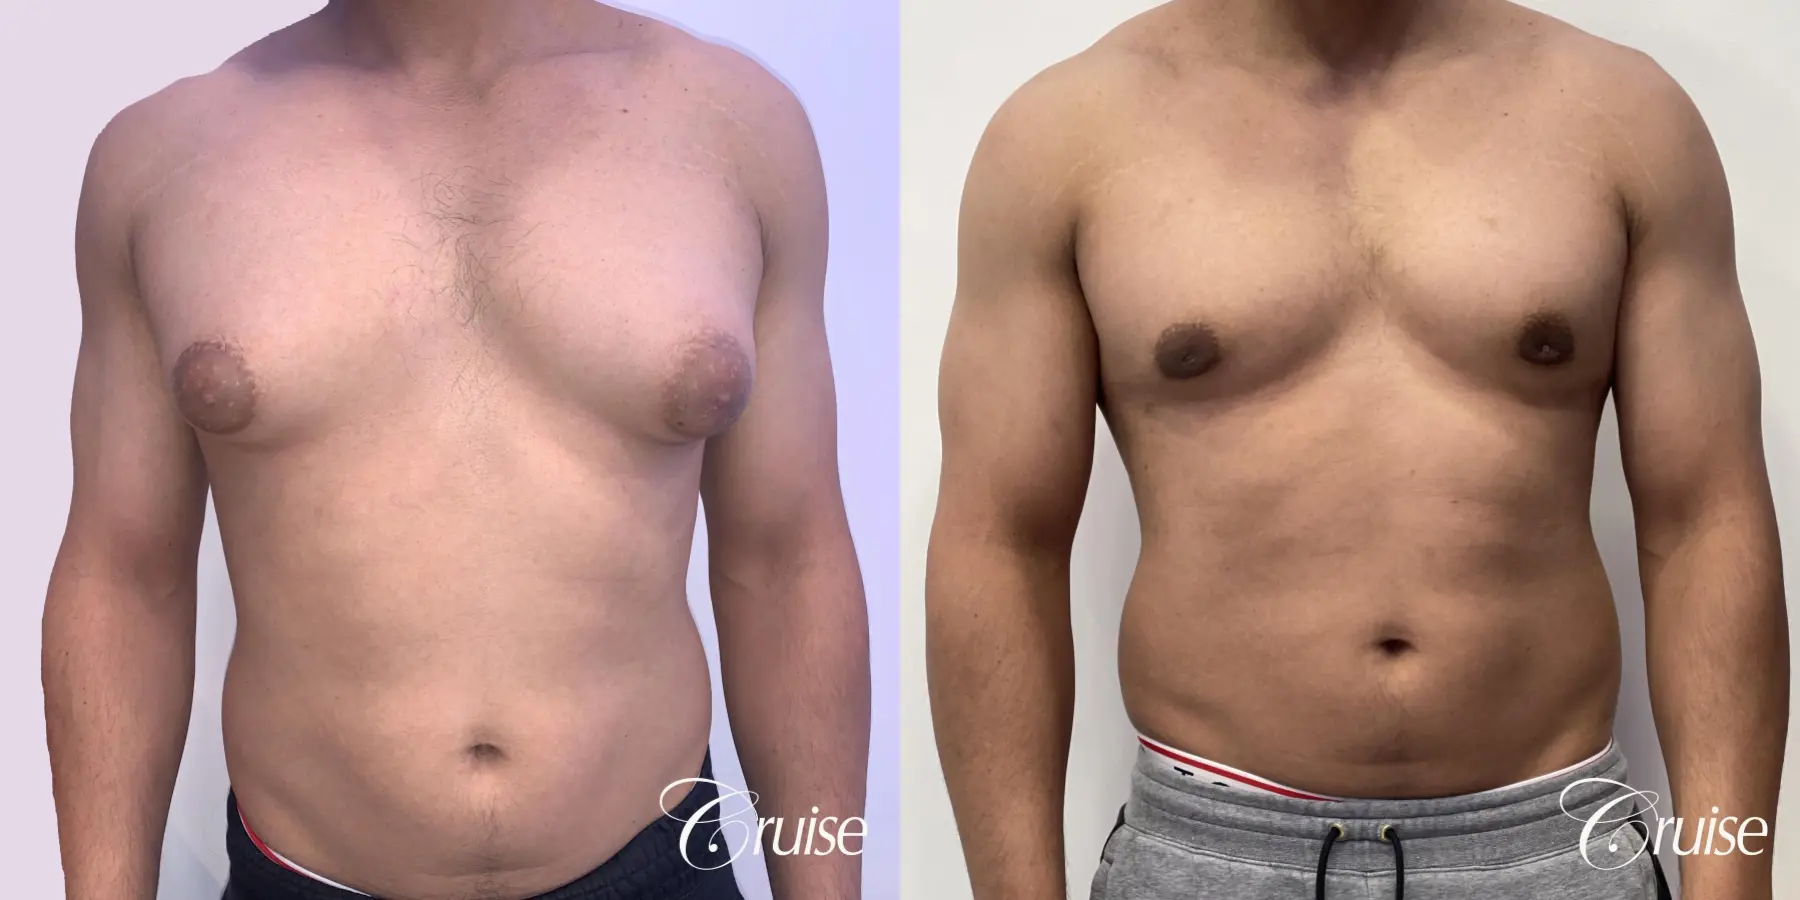 gynecomastia surgery - Before and After 1